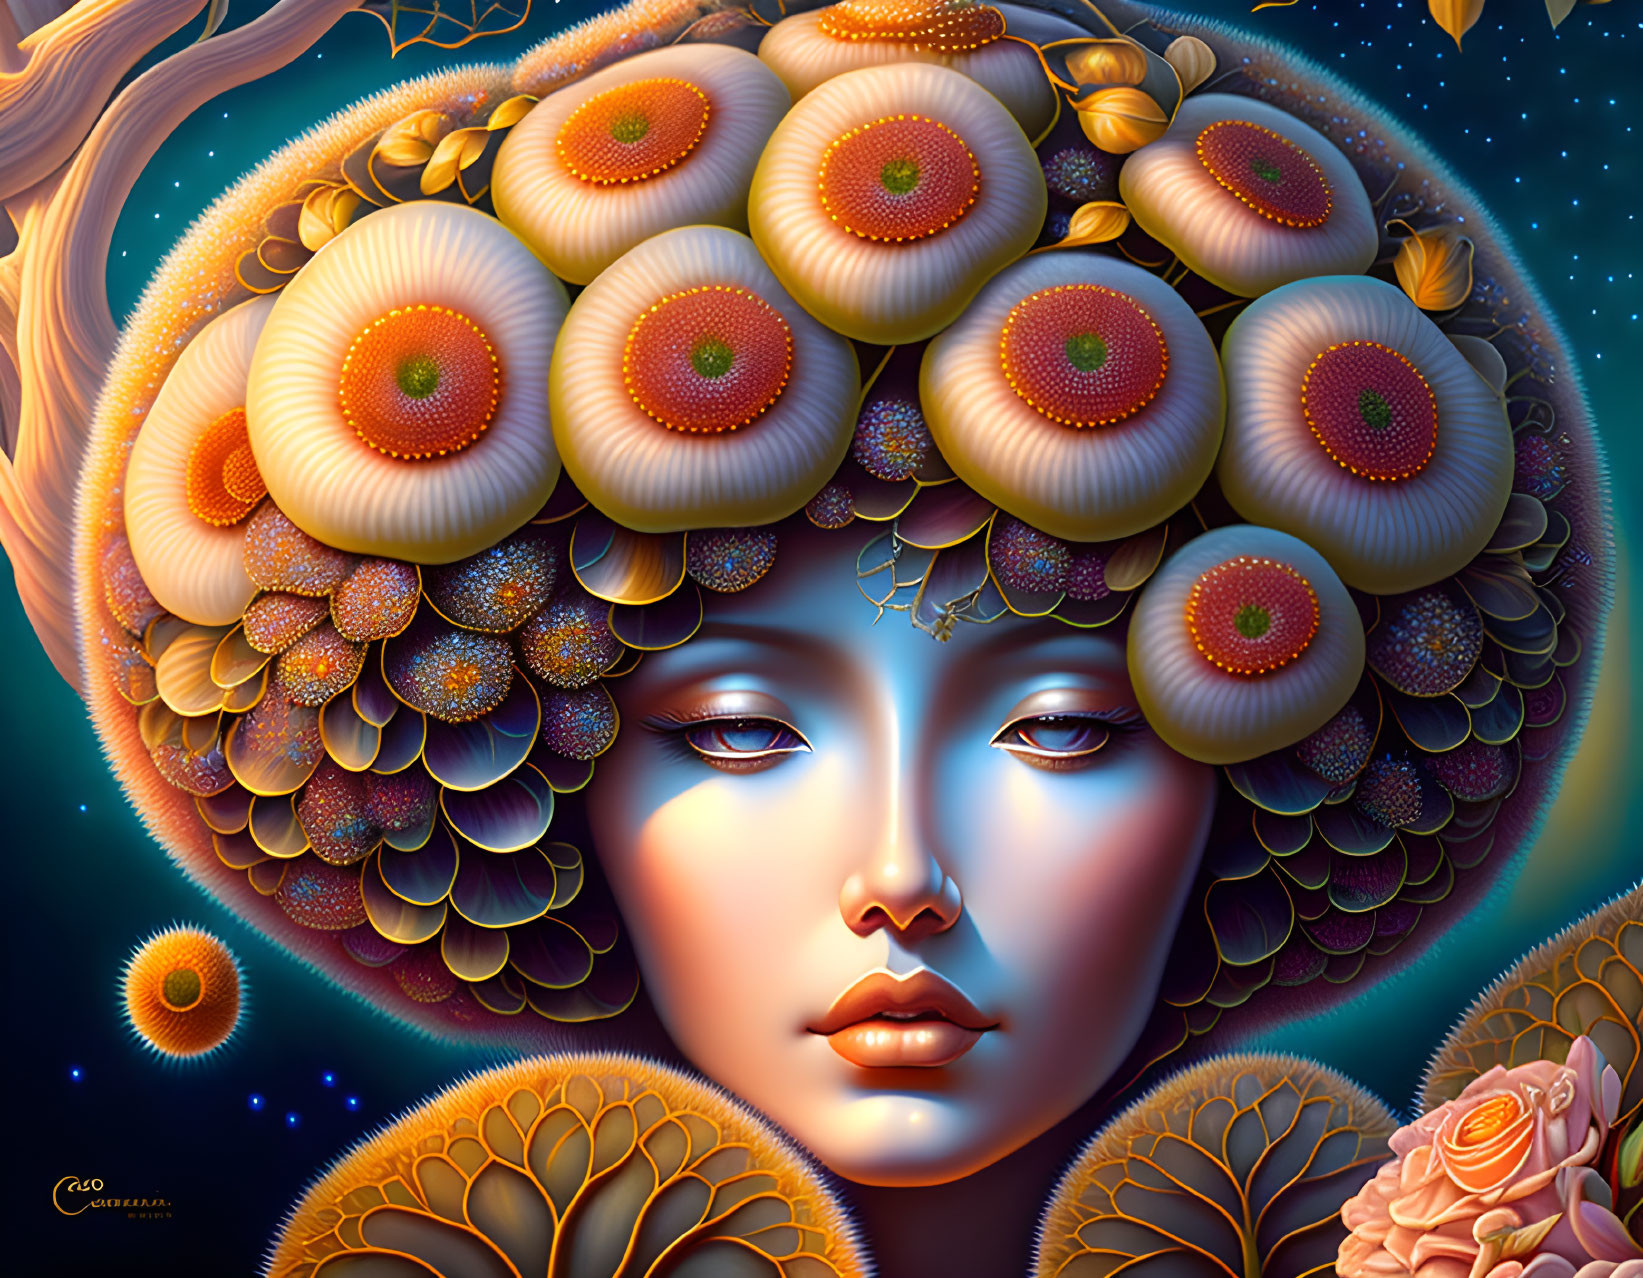 Surreal portrait of feminine figure with floral and cosmic elements